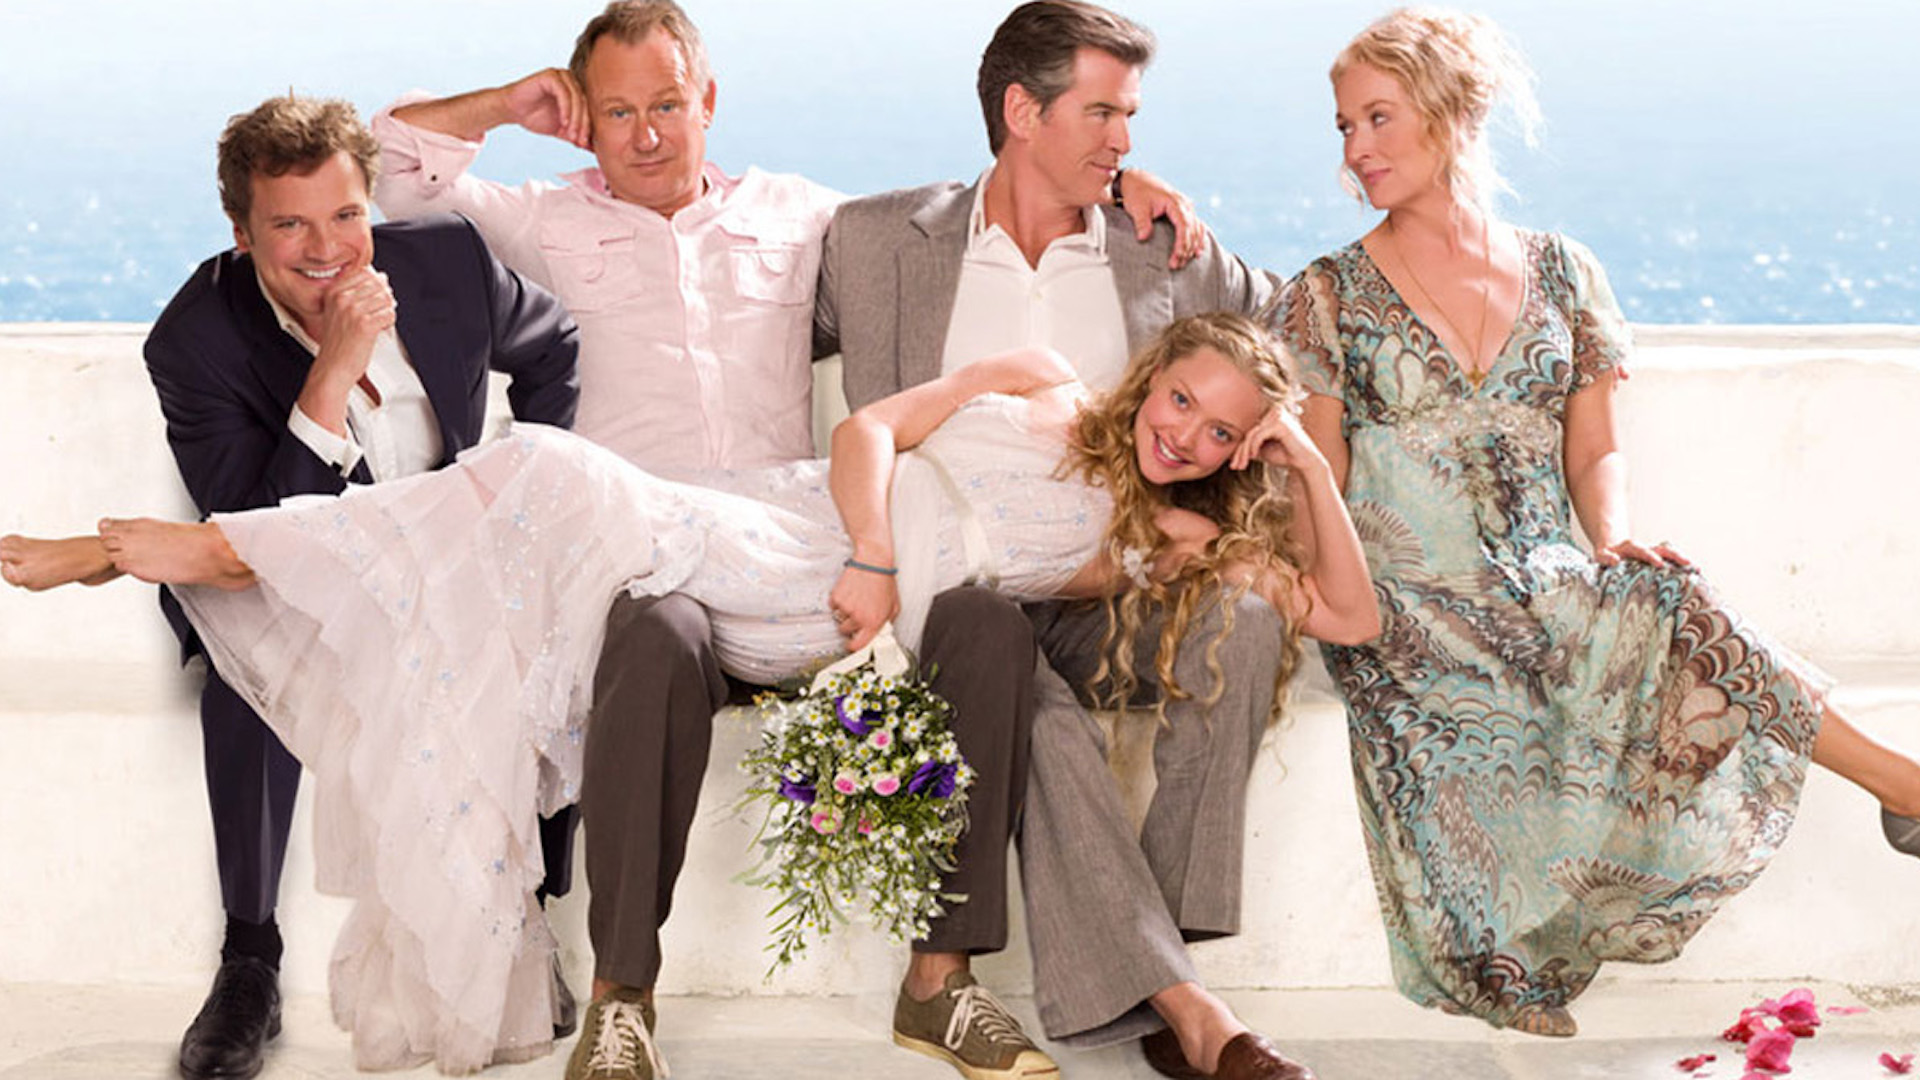 A promotional photo from Mamma Mia, featuring the main characters